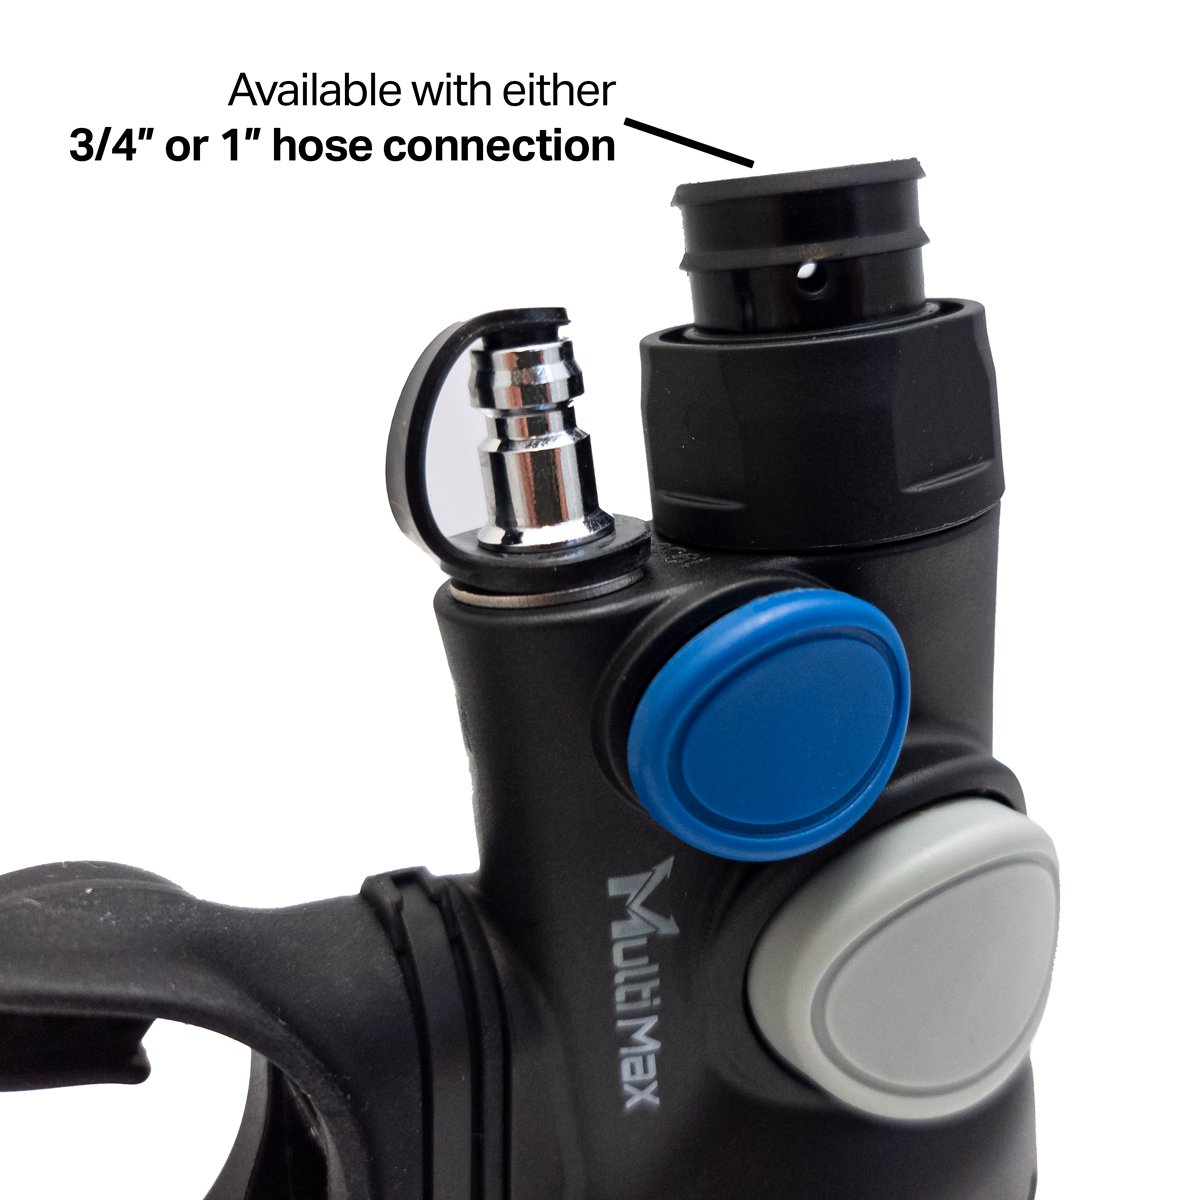 MultiMax Breathable Inflator